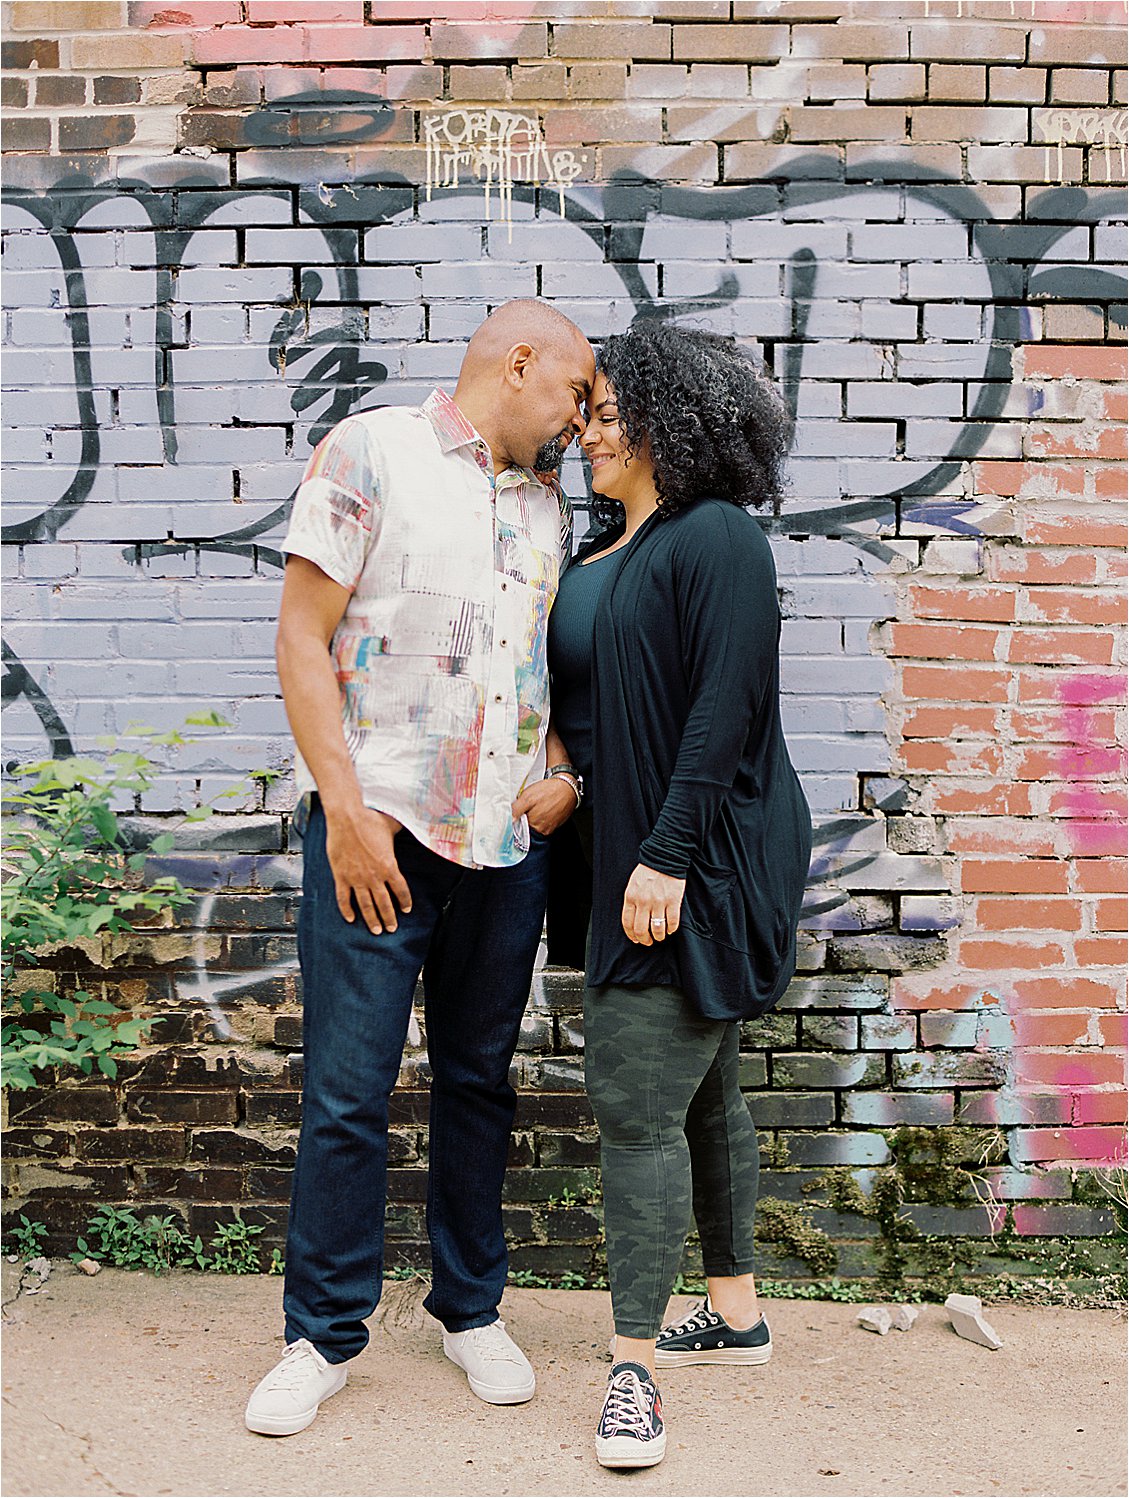 Casual Urban & Gritty Washington DC Engagement Session with DC + Destination Film Wedding Photographer, Renee Hollingshead